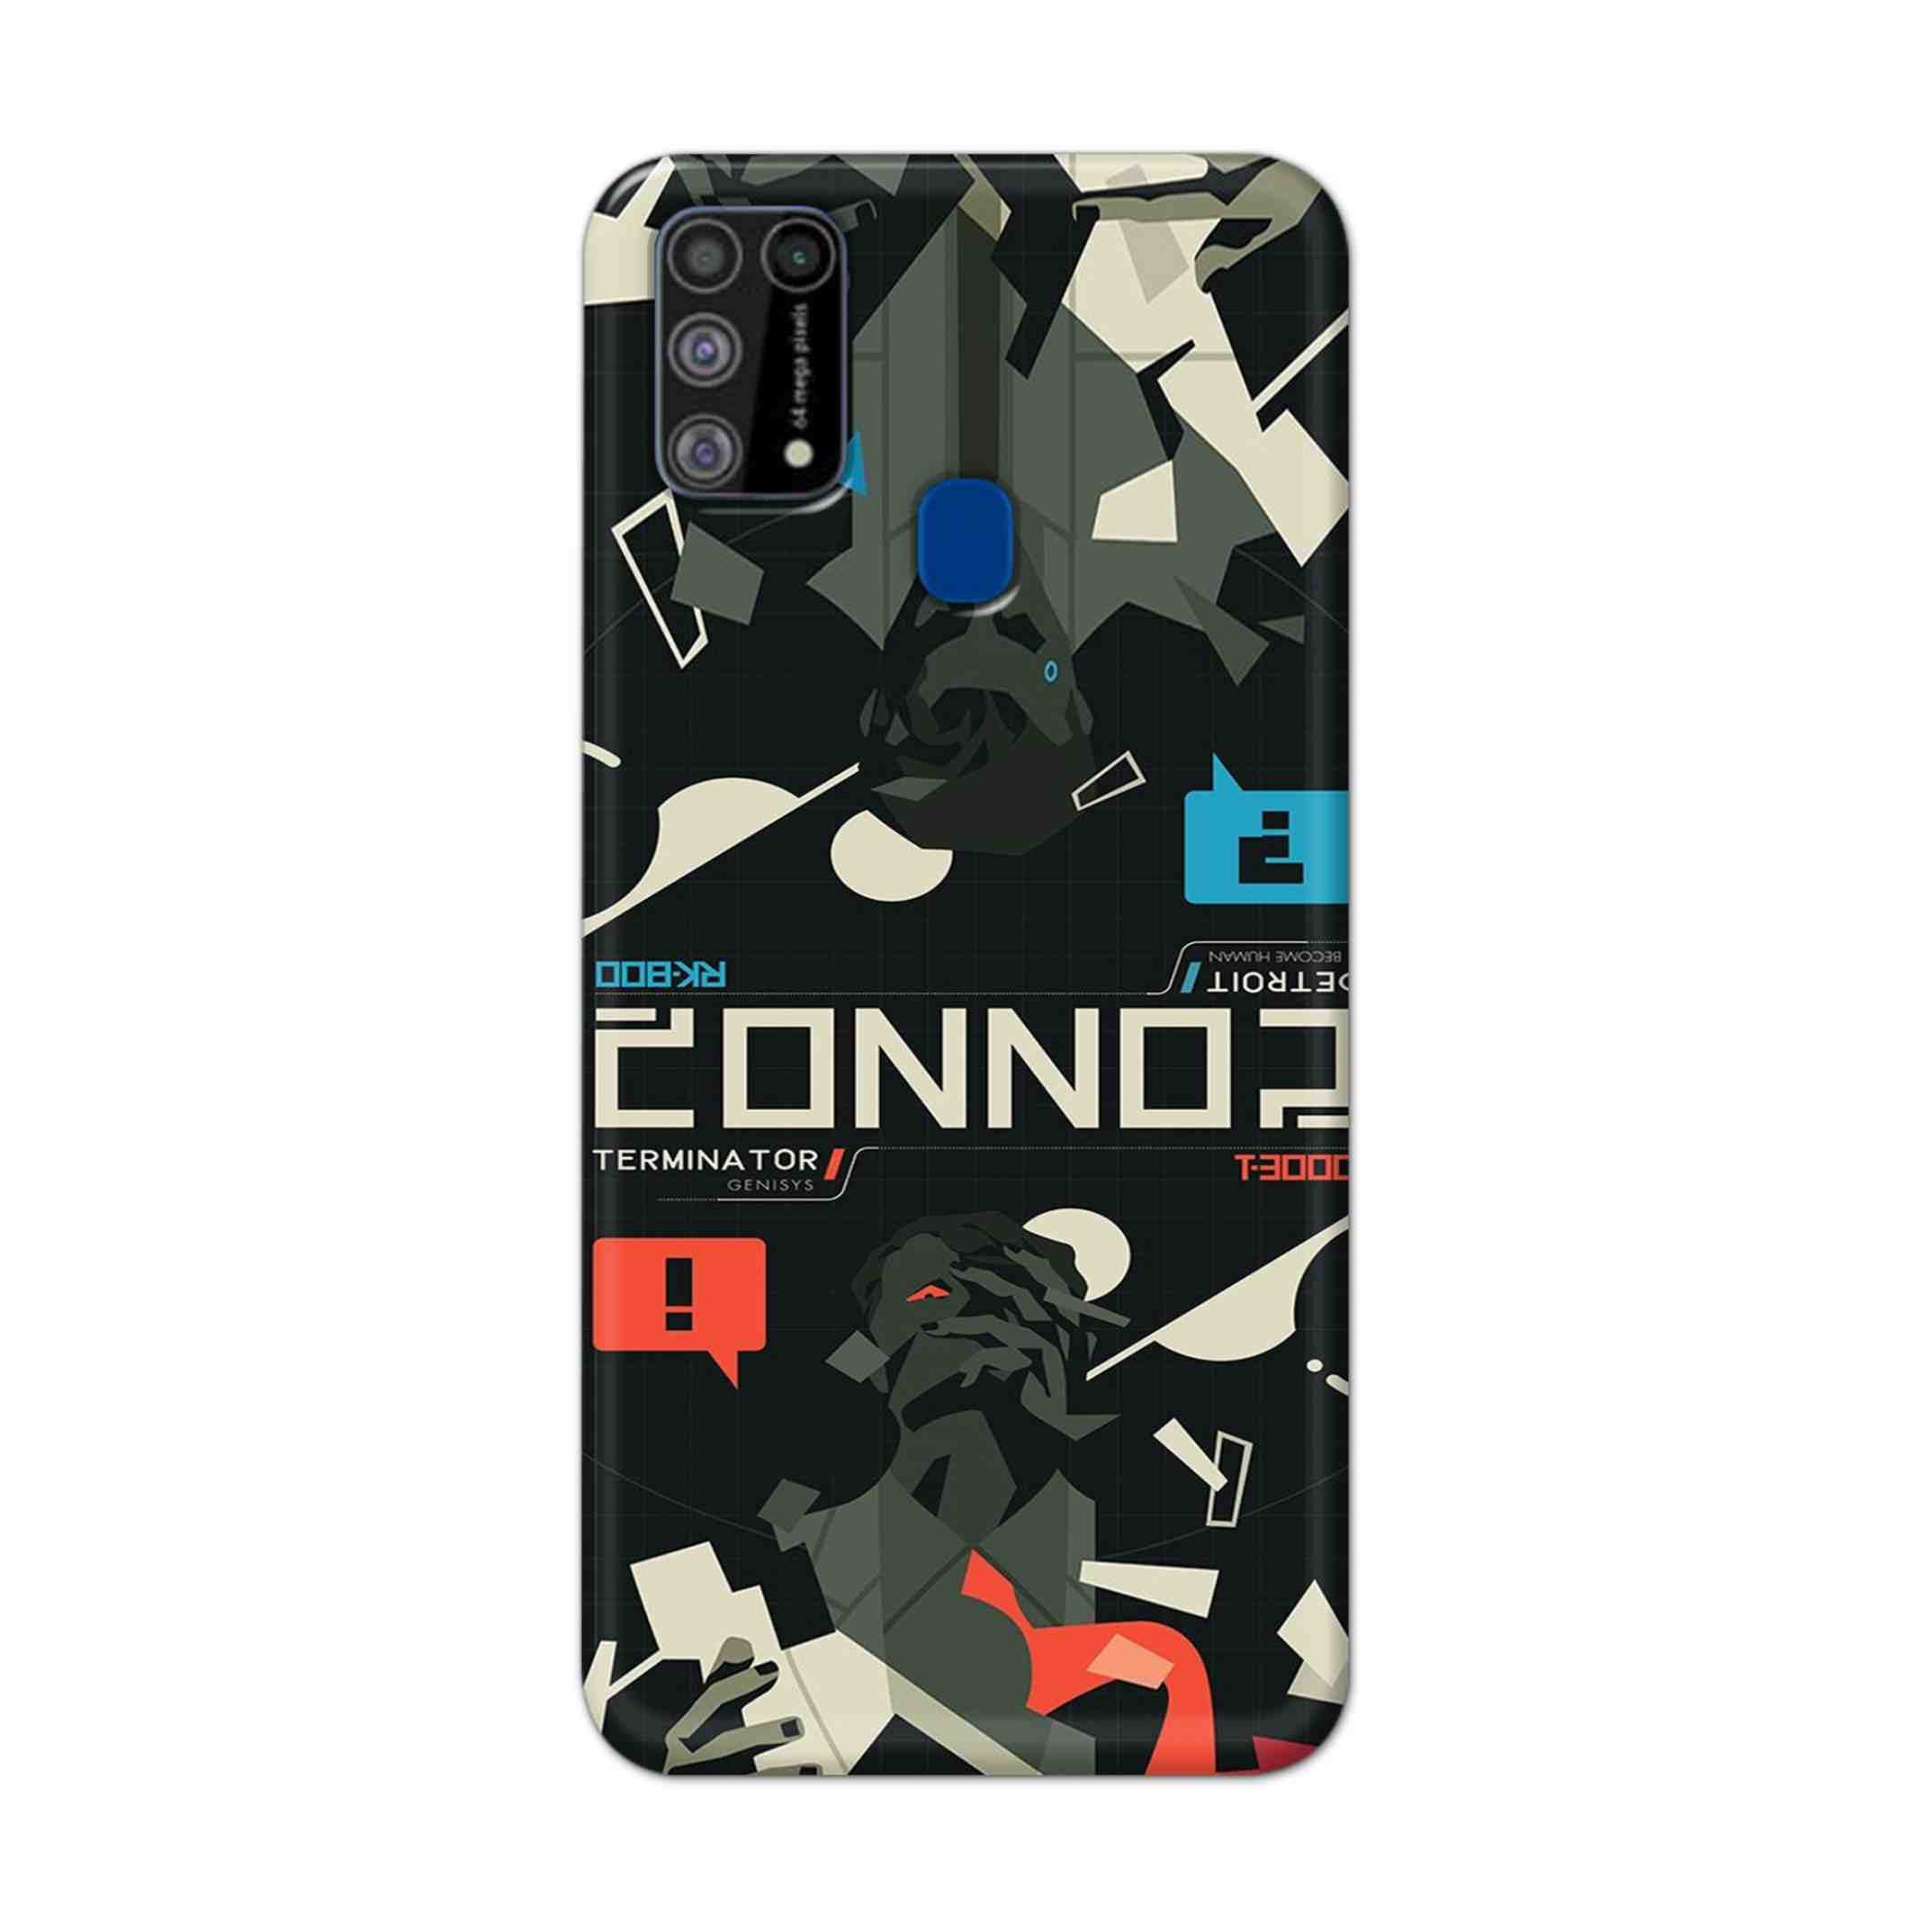 Buy Terminator Hard Back Mobile Phone Case Cover For Samsung Galaxy M31 Online